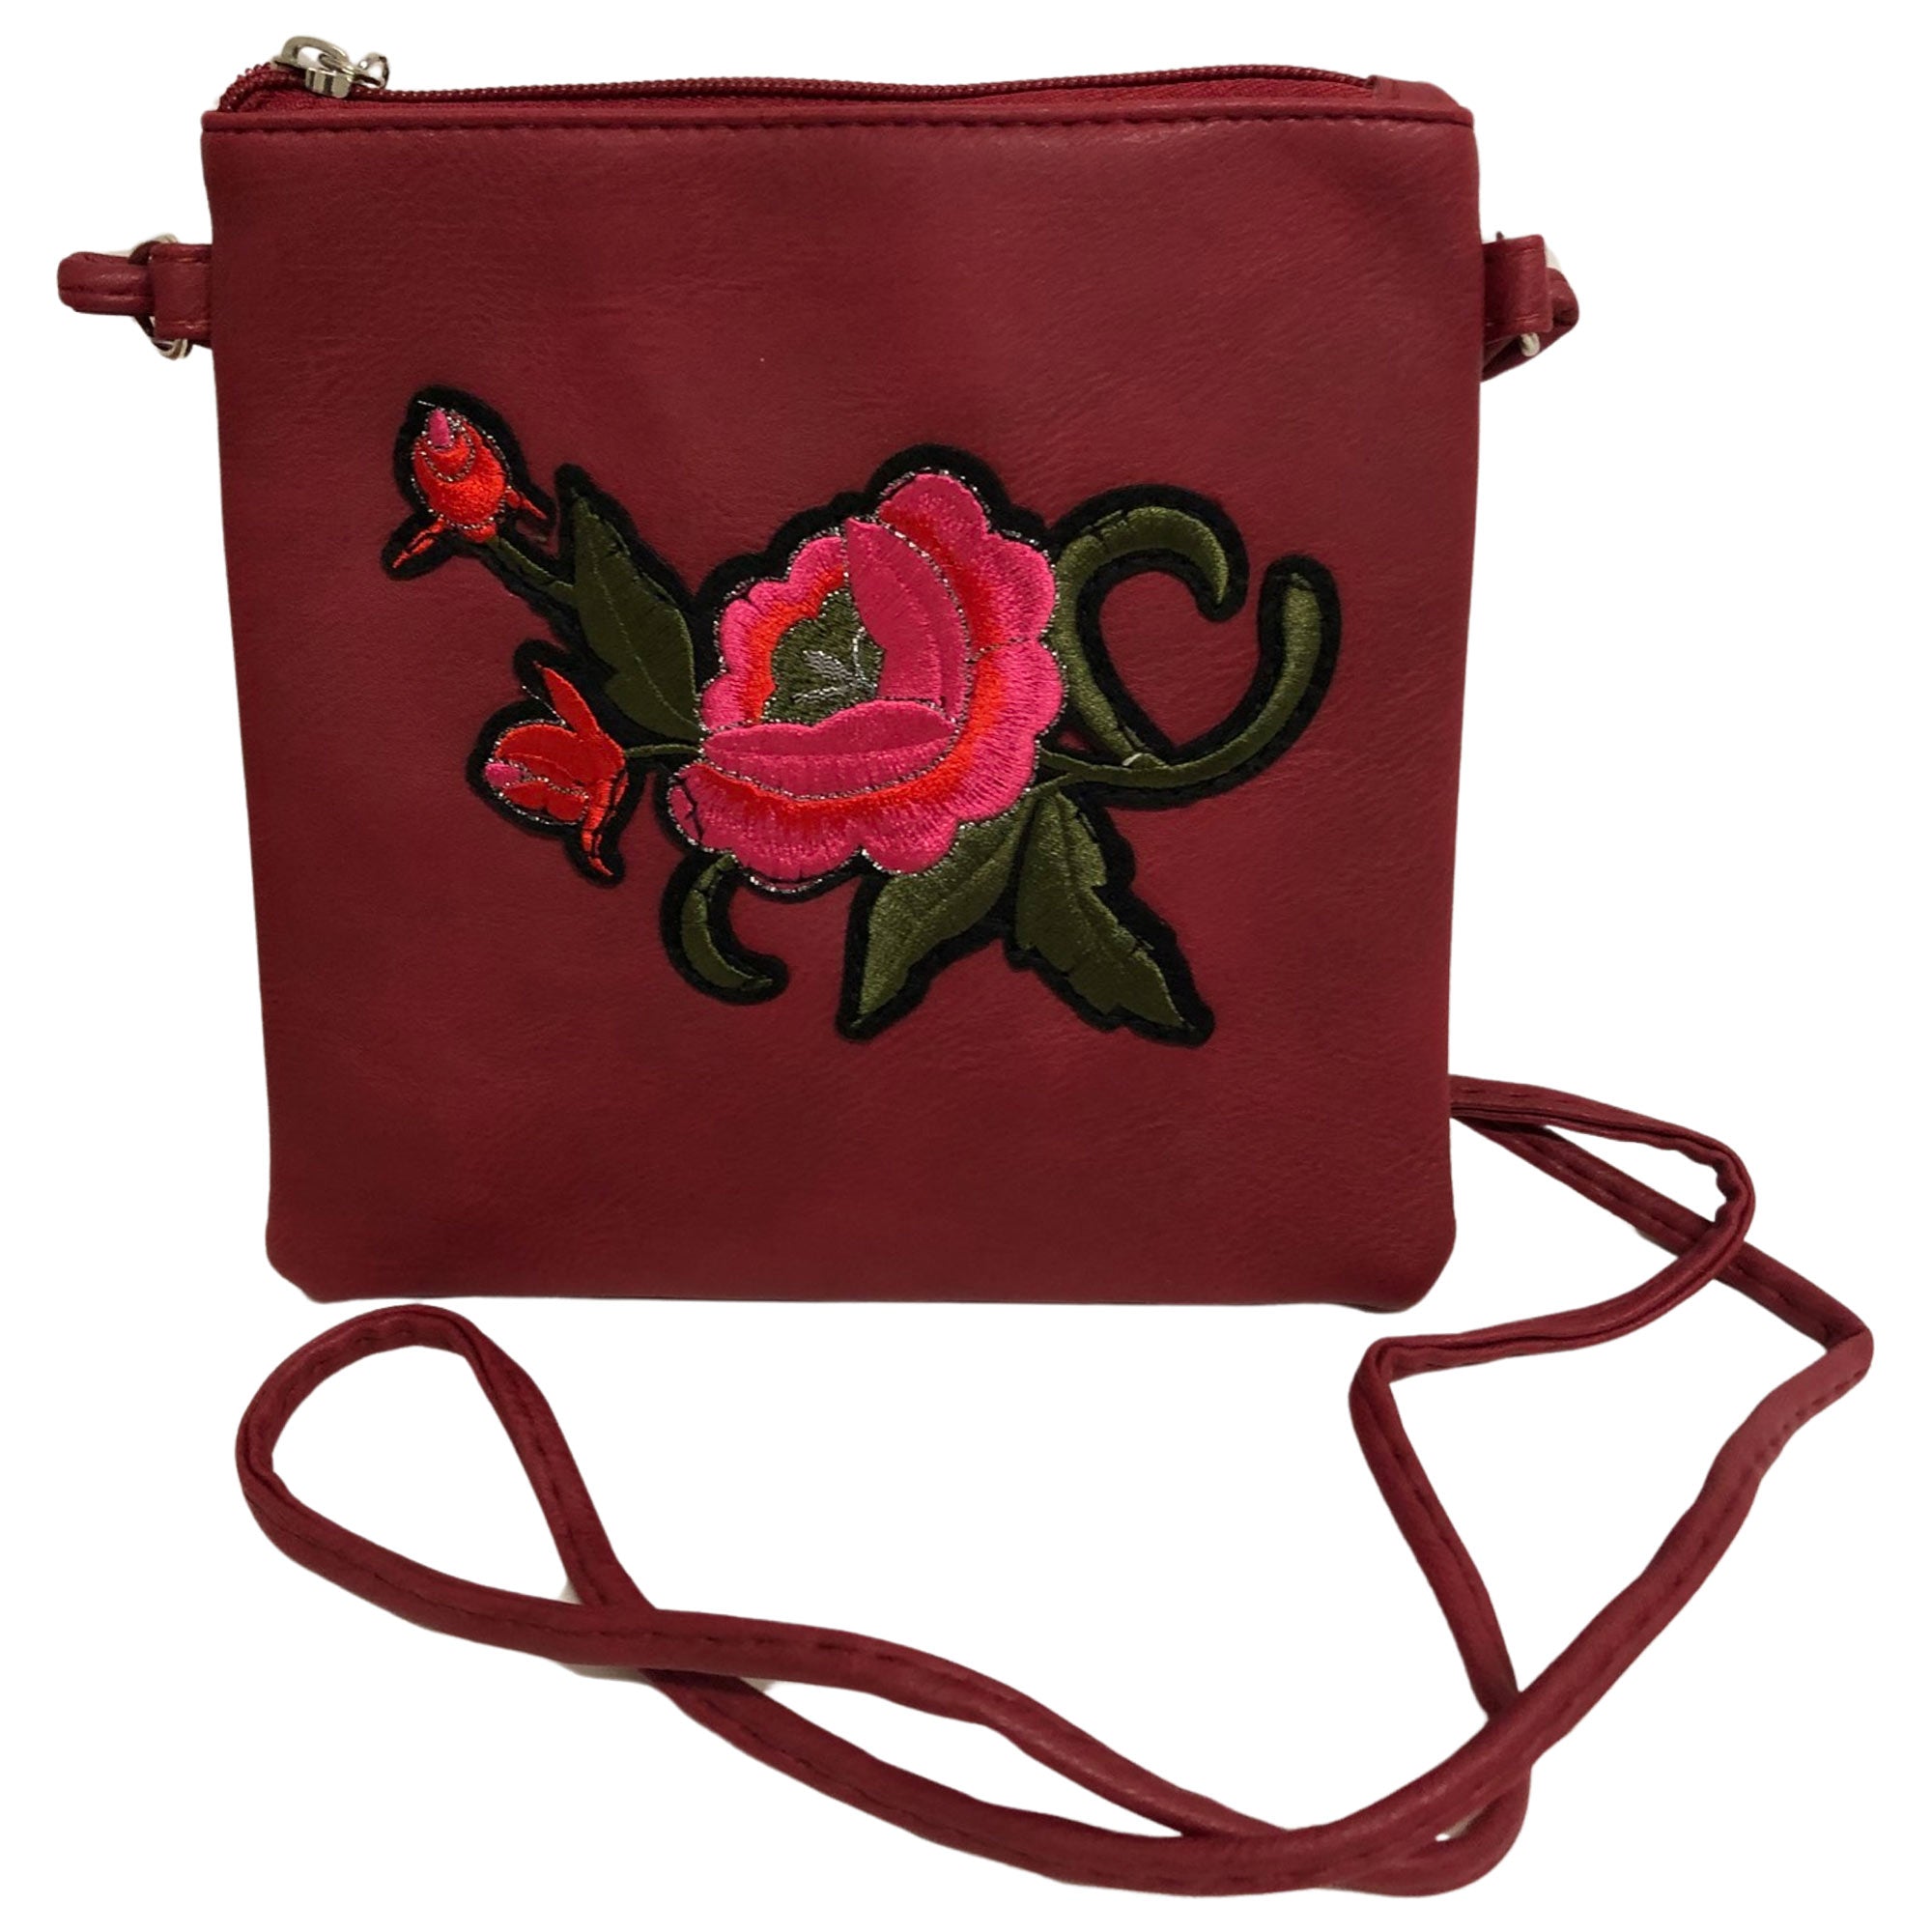 CLEARANCE WOMEN'S ROSE EMBROIDERED CROSSBODY (CASE OF 36 - $1.75 / PIECE)  Wholesale Crossbody with a Rose Embroidered Design SKU: 7304-DK-36